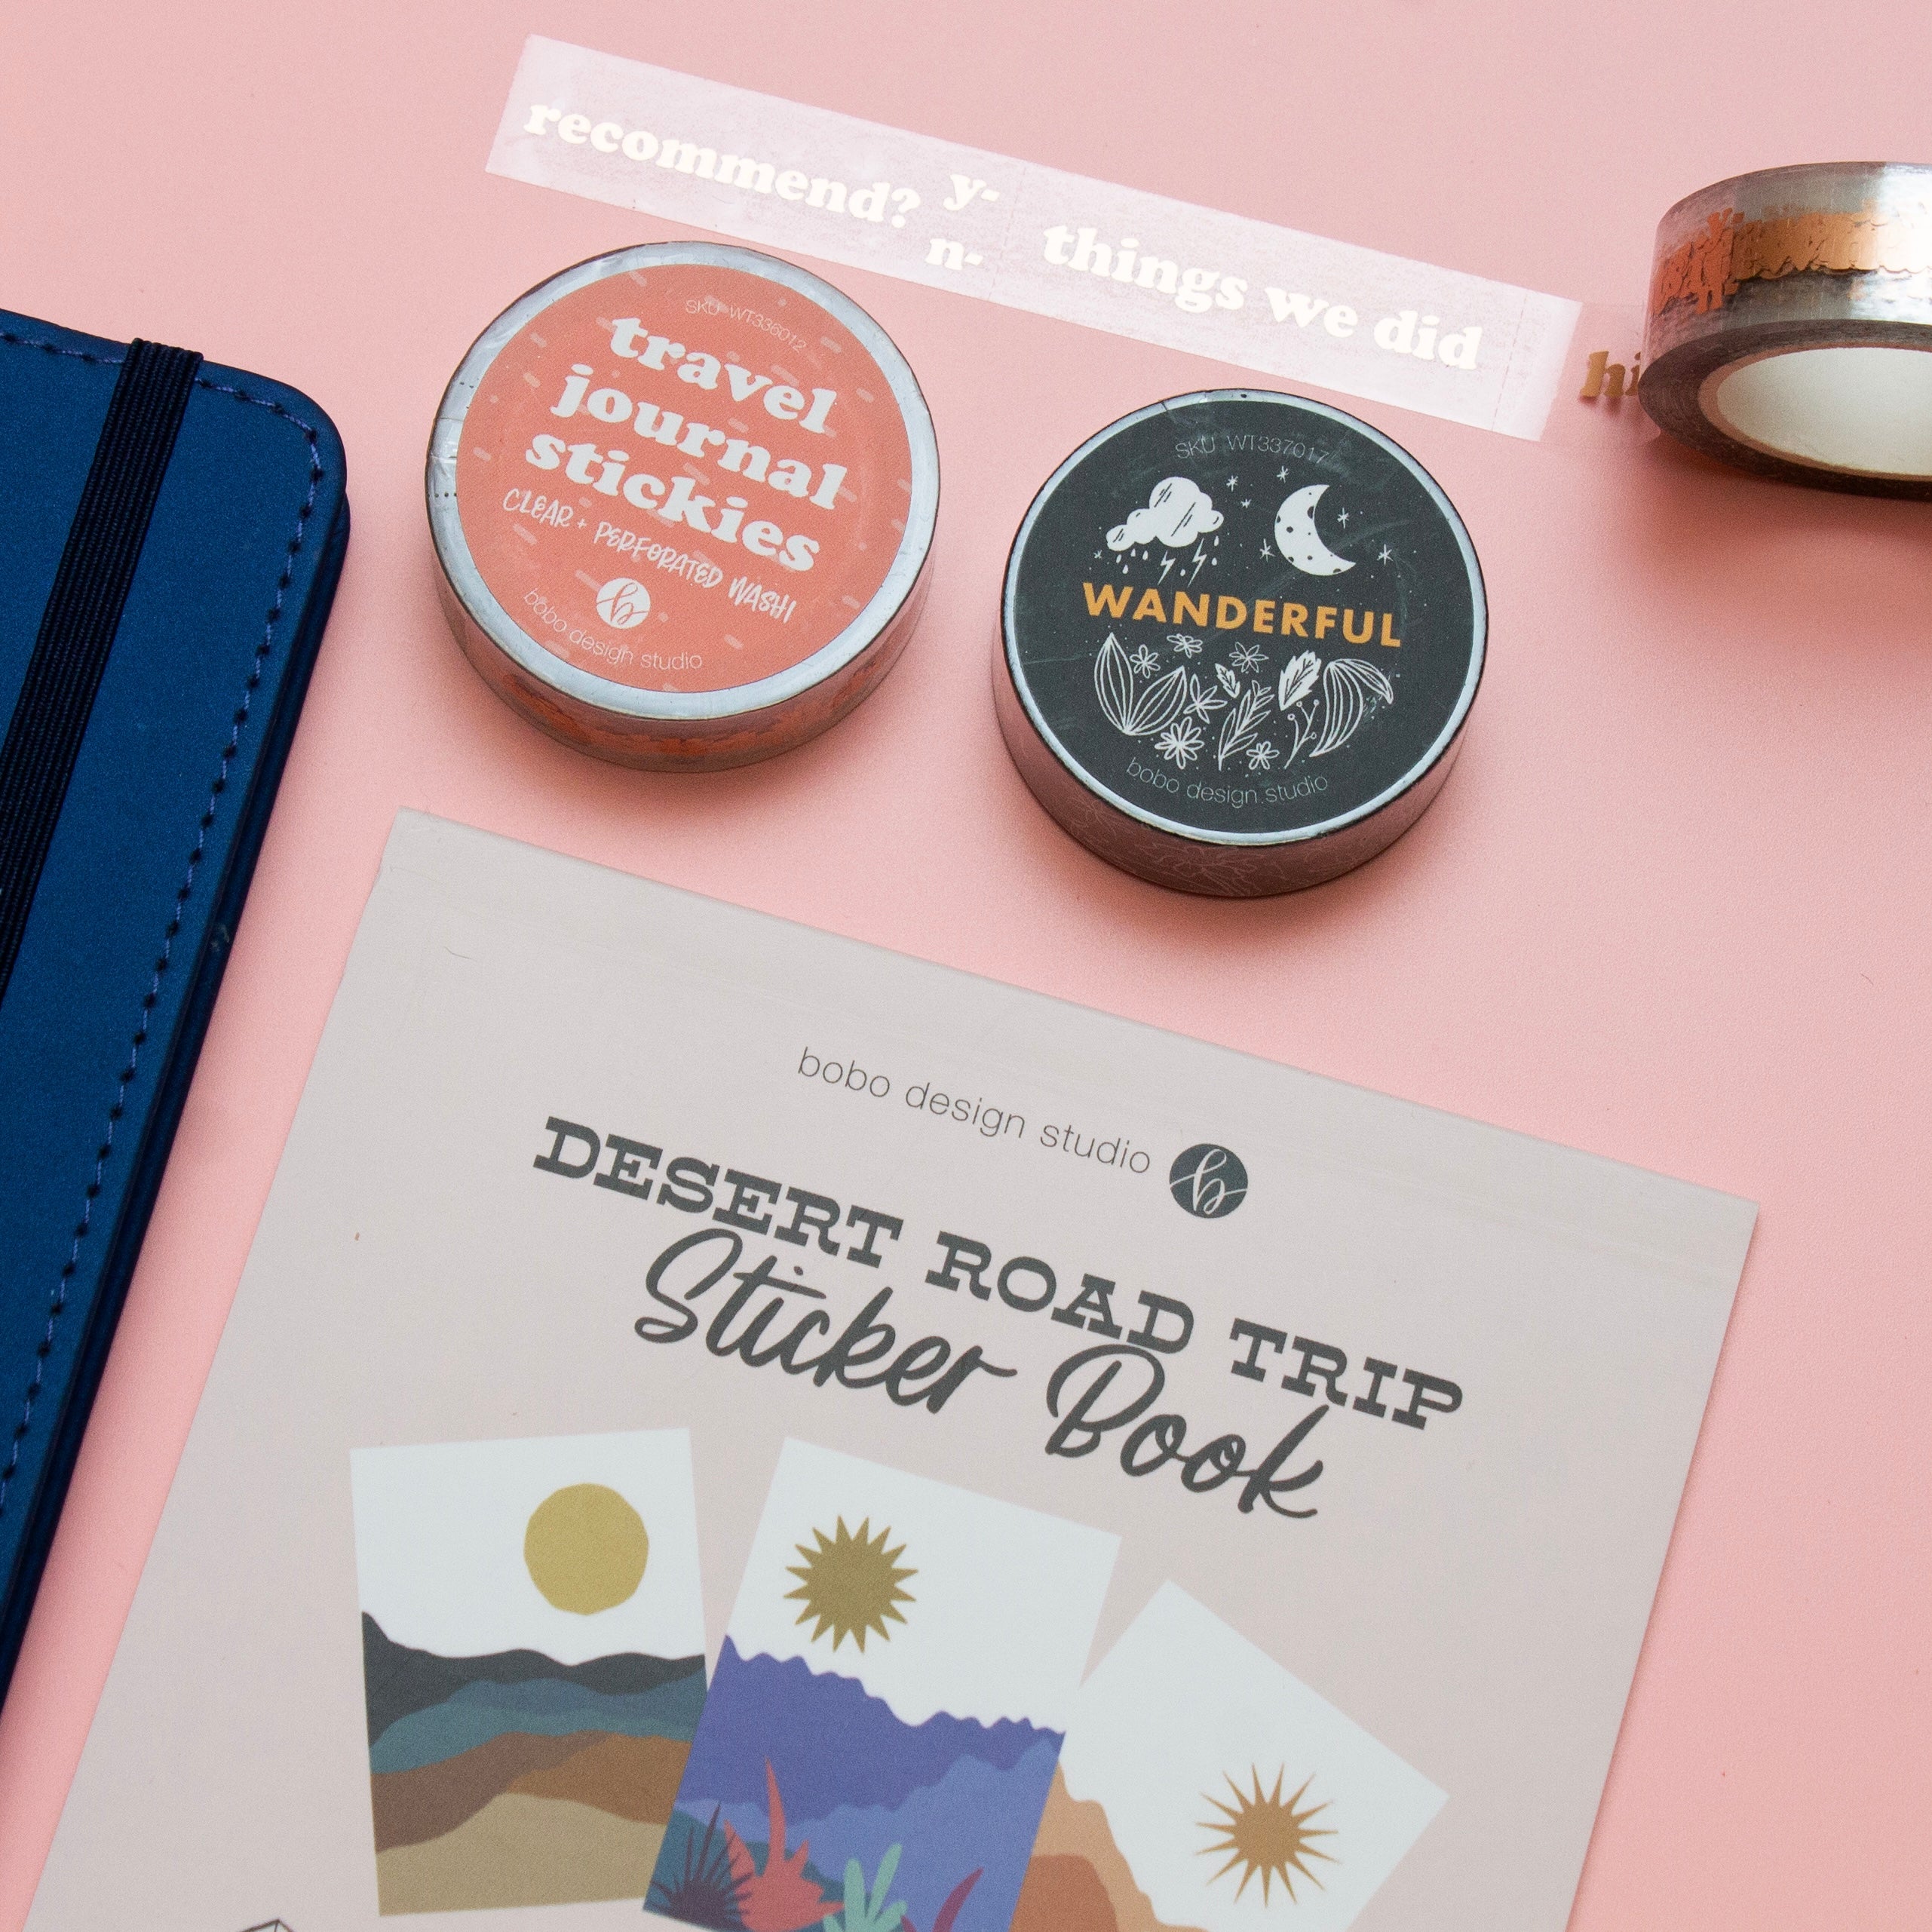 Fill Your Wanderlust With These Limited-Edition Travel-Themed